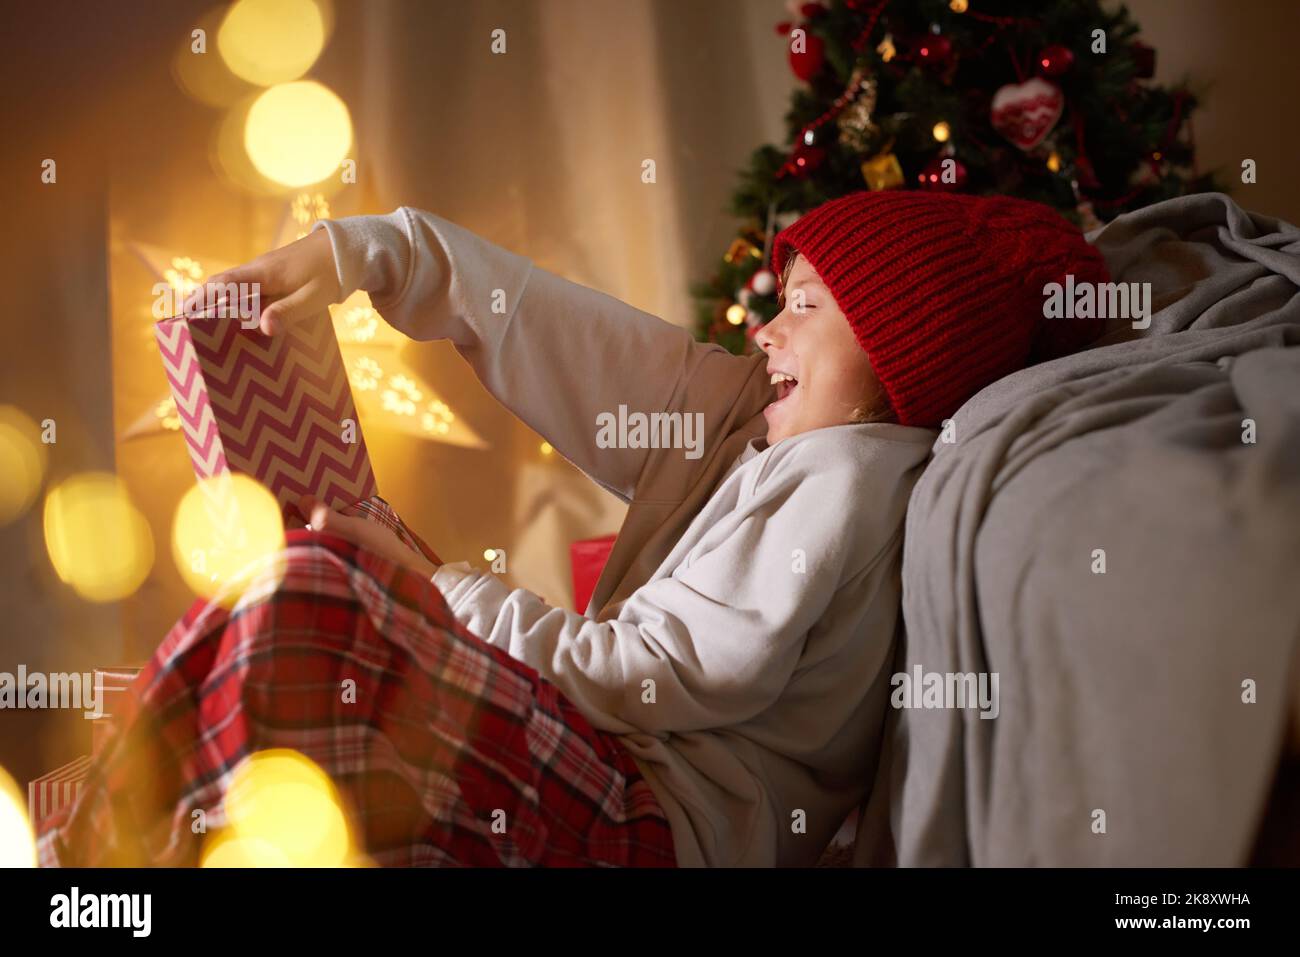 Kid reaction to Christmas Day gift opening New Year card adorable character Gifts giving tradition Stock Photo